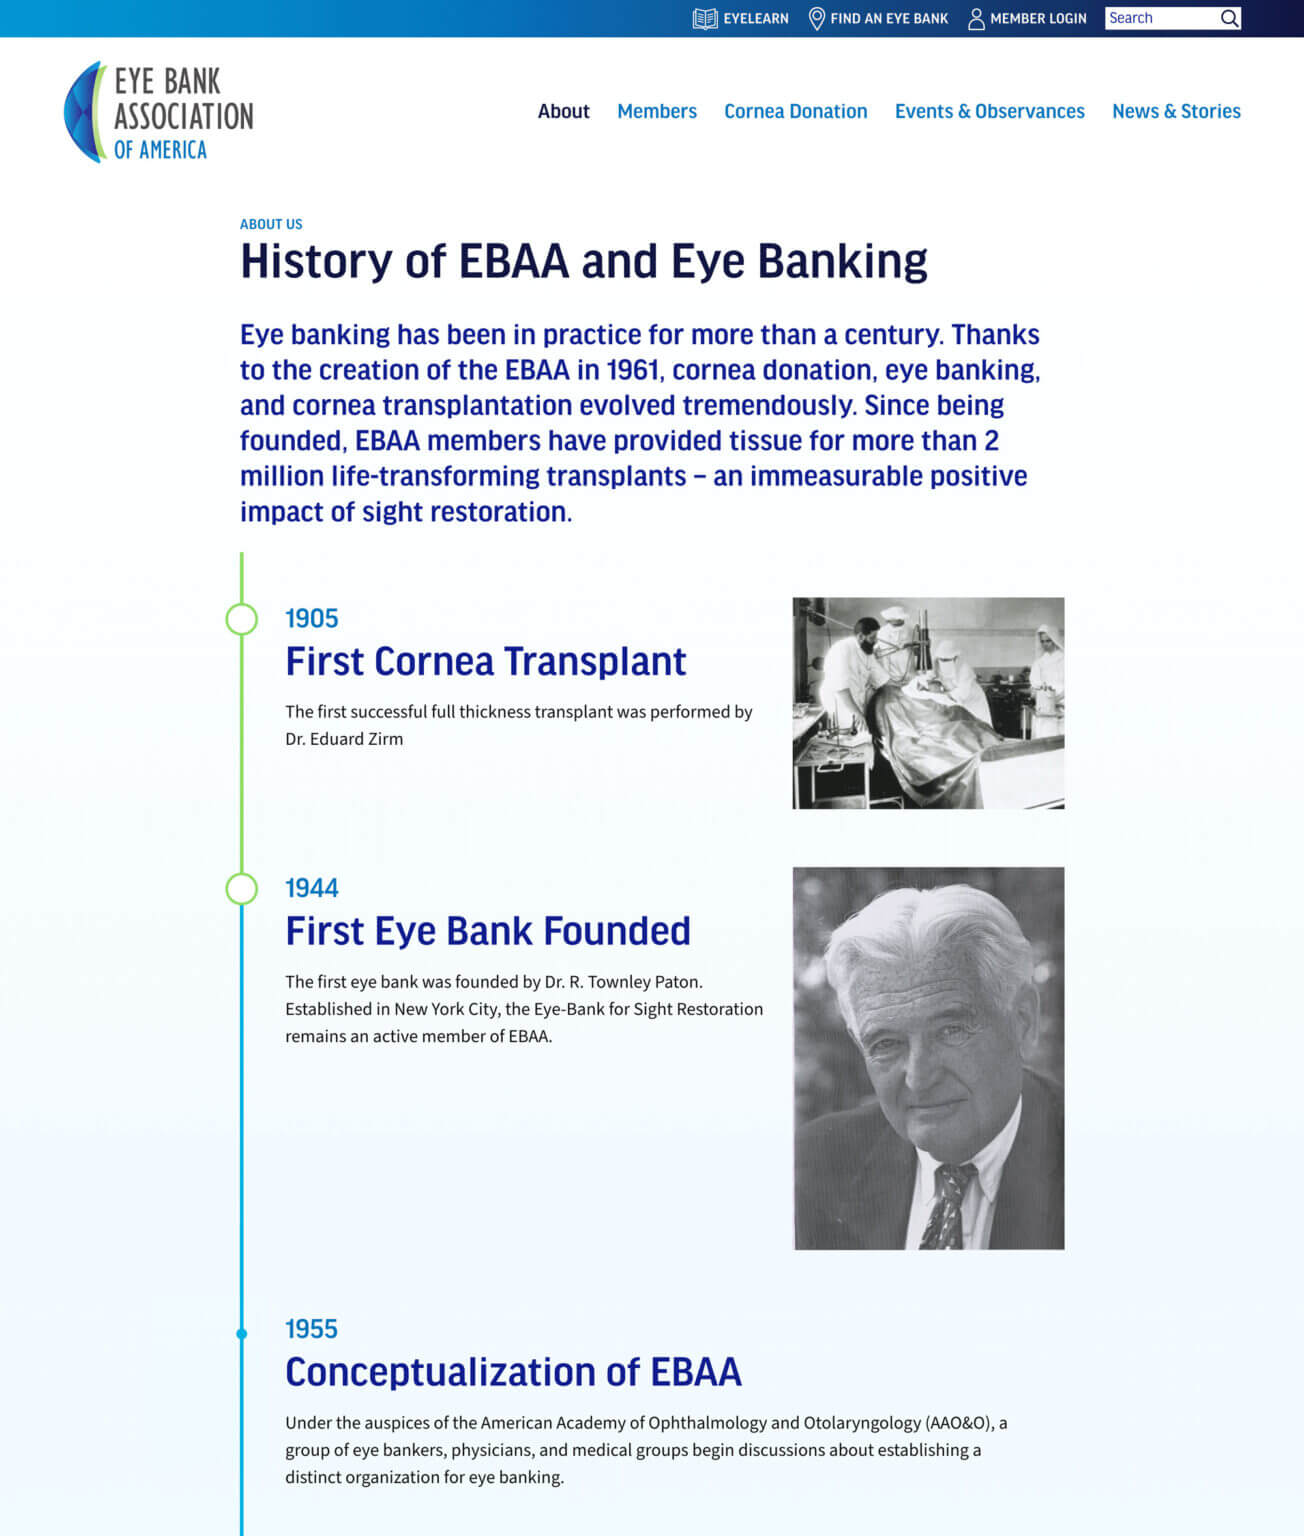 The restoresight.org page showing the history of EBBA and eye banking.